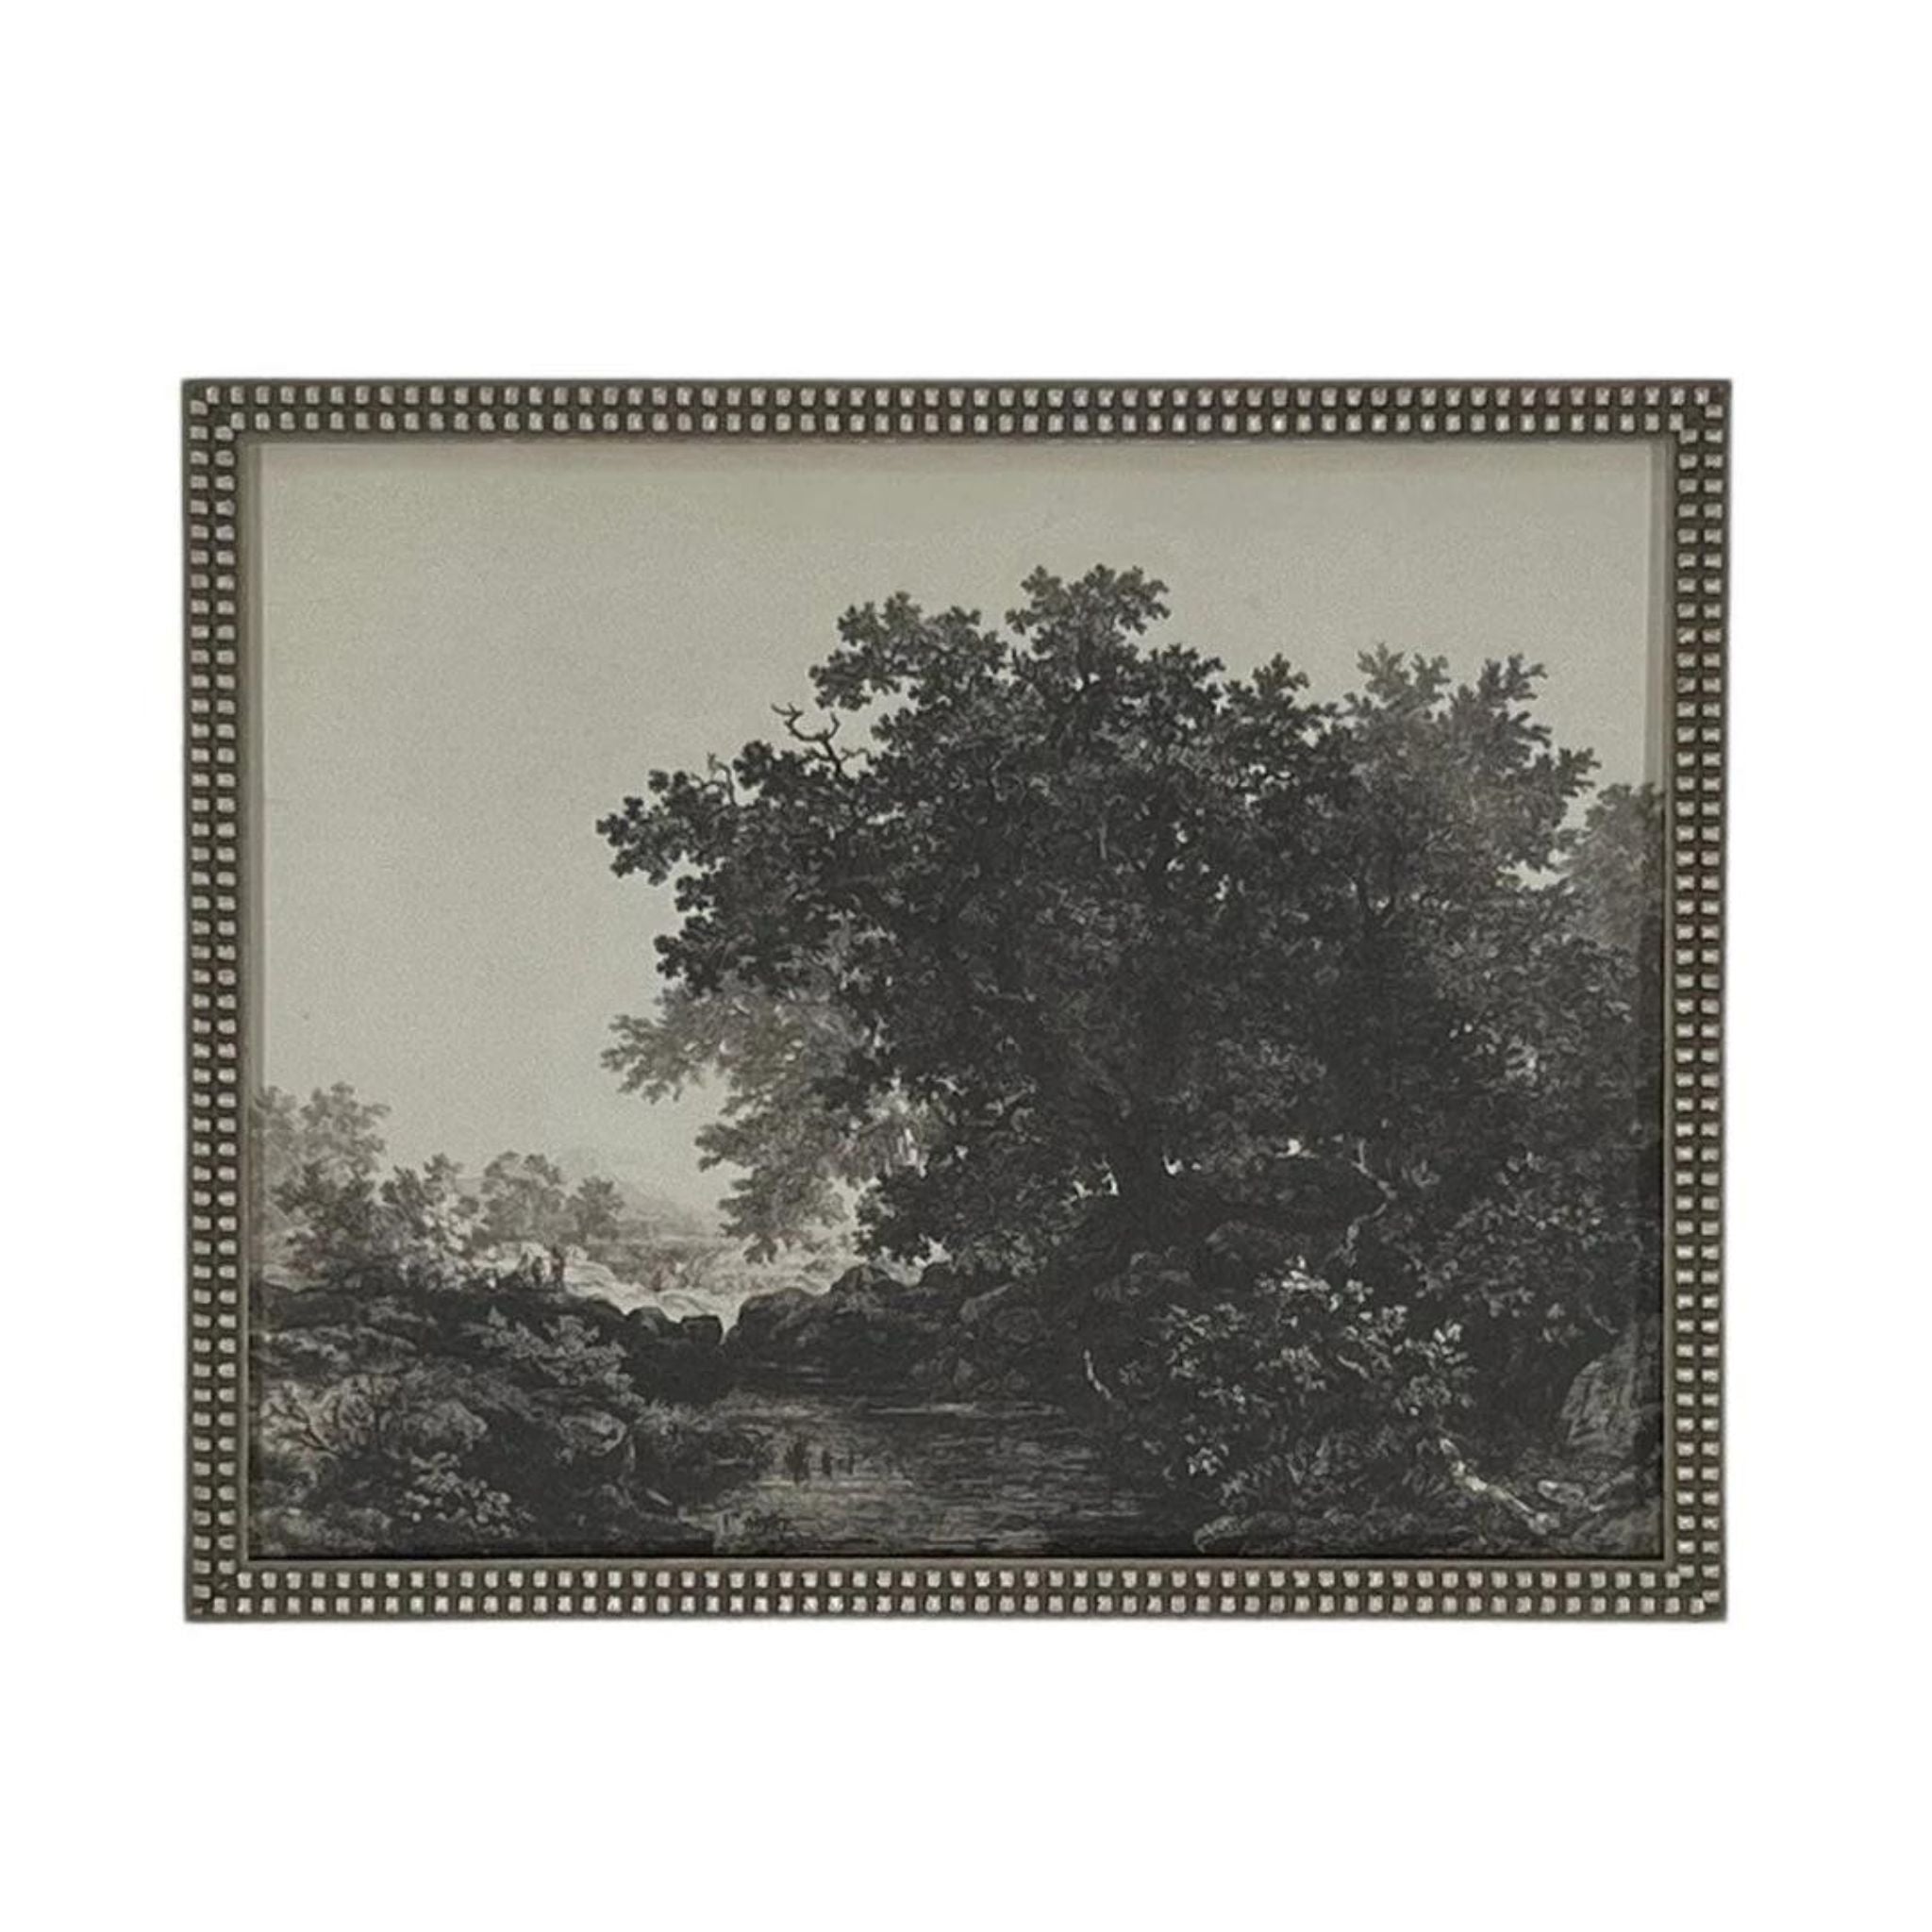 VINTAGE FRAMED CANVAS ART - BLACK & WHITE TREE - BEADED SILVER FRAME - The black and white tree design adds a touch of timeless beauty to any space. - Simply Elevated Home Furnishing 